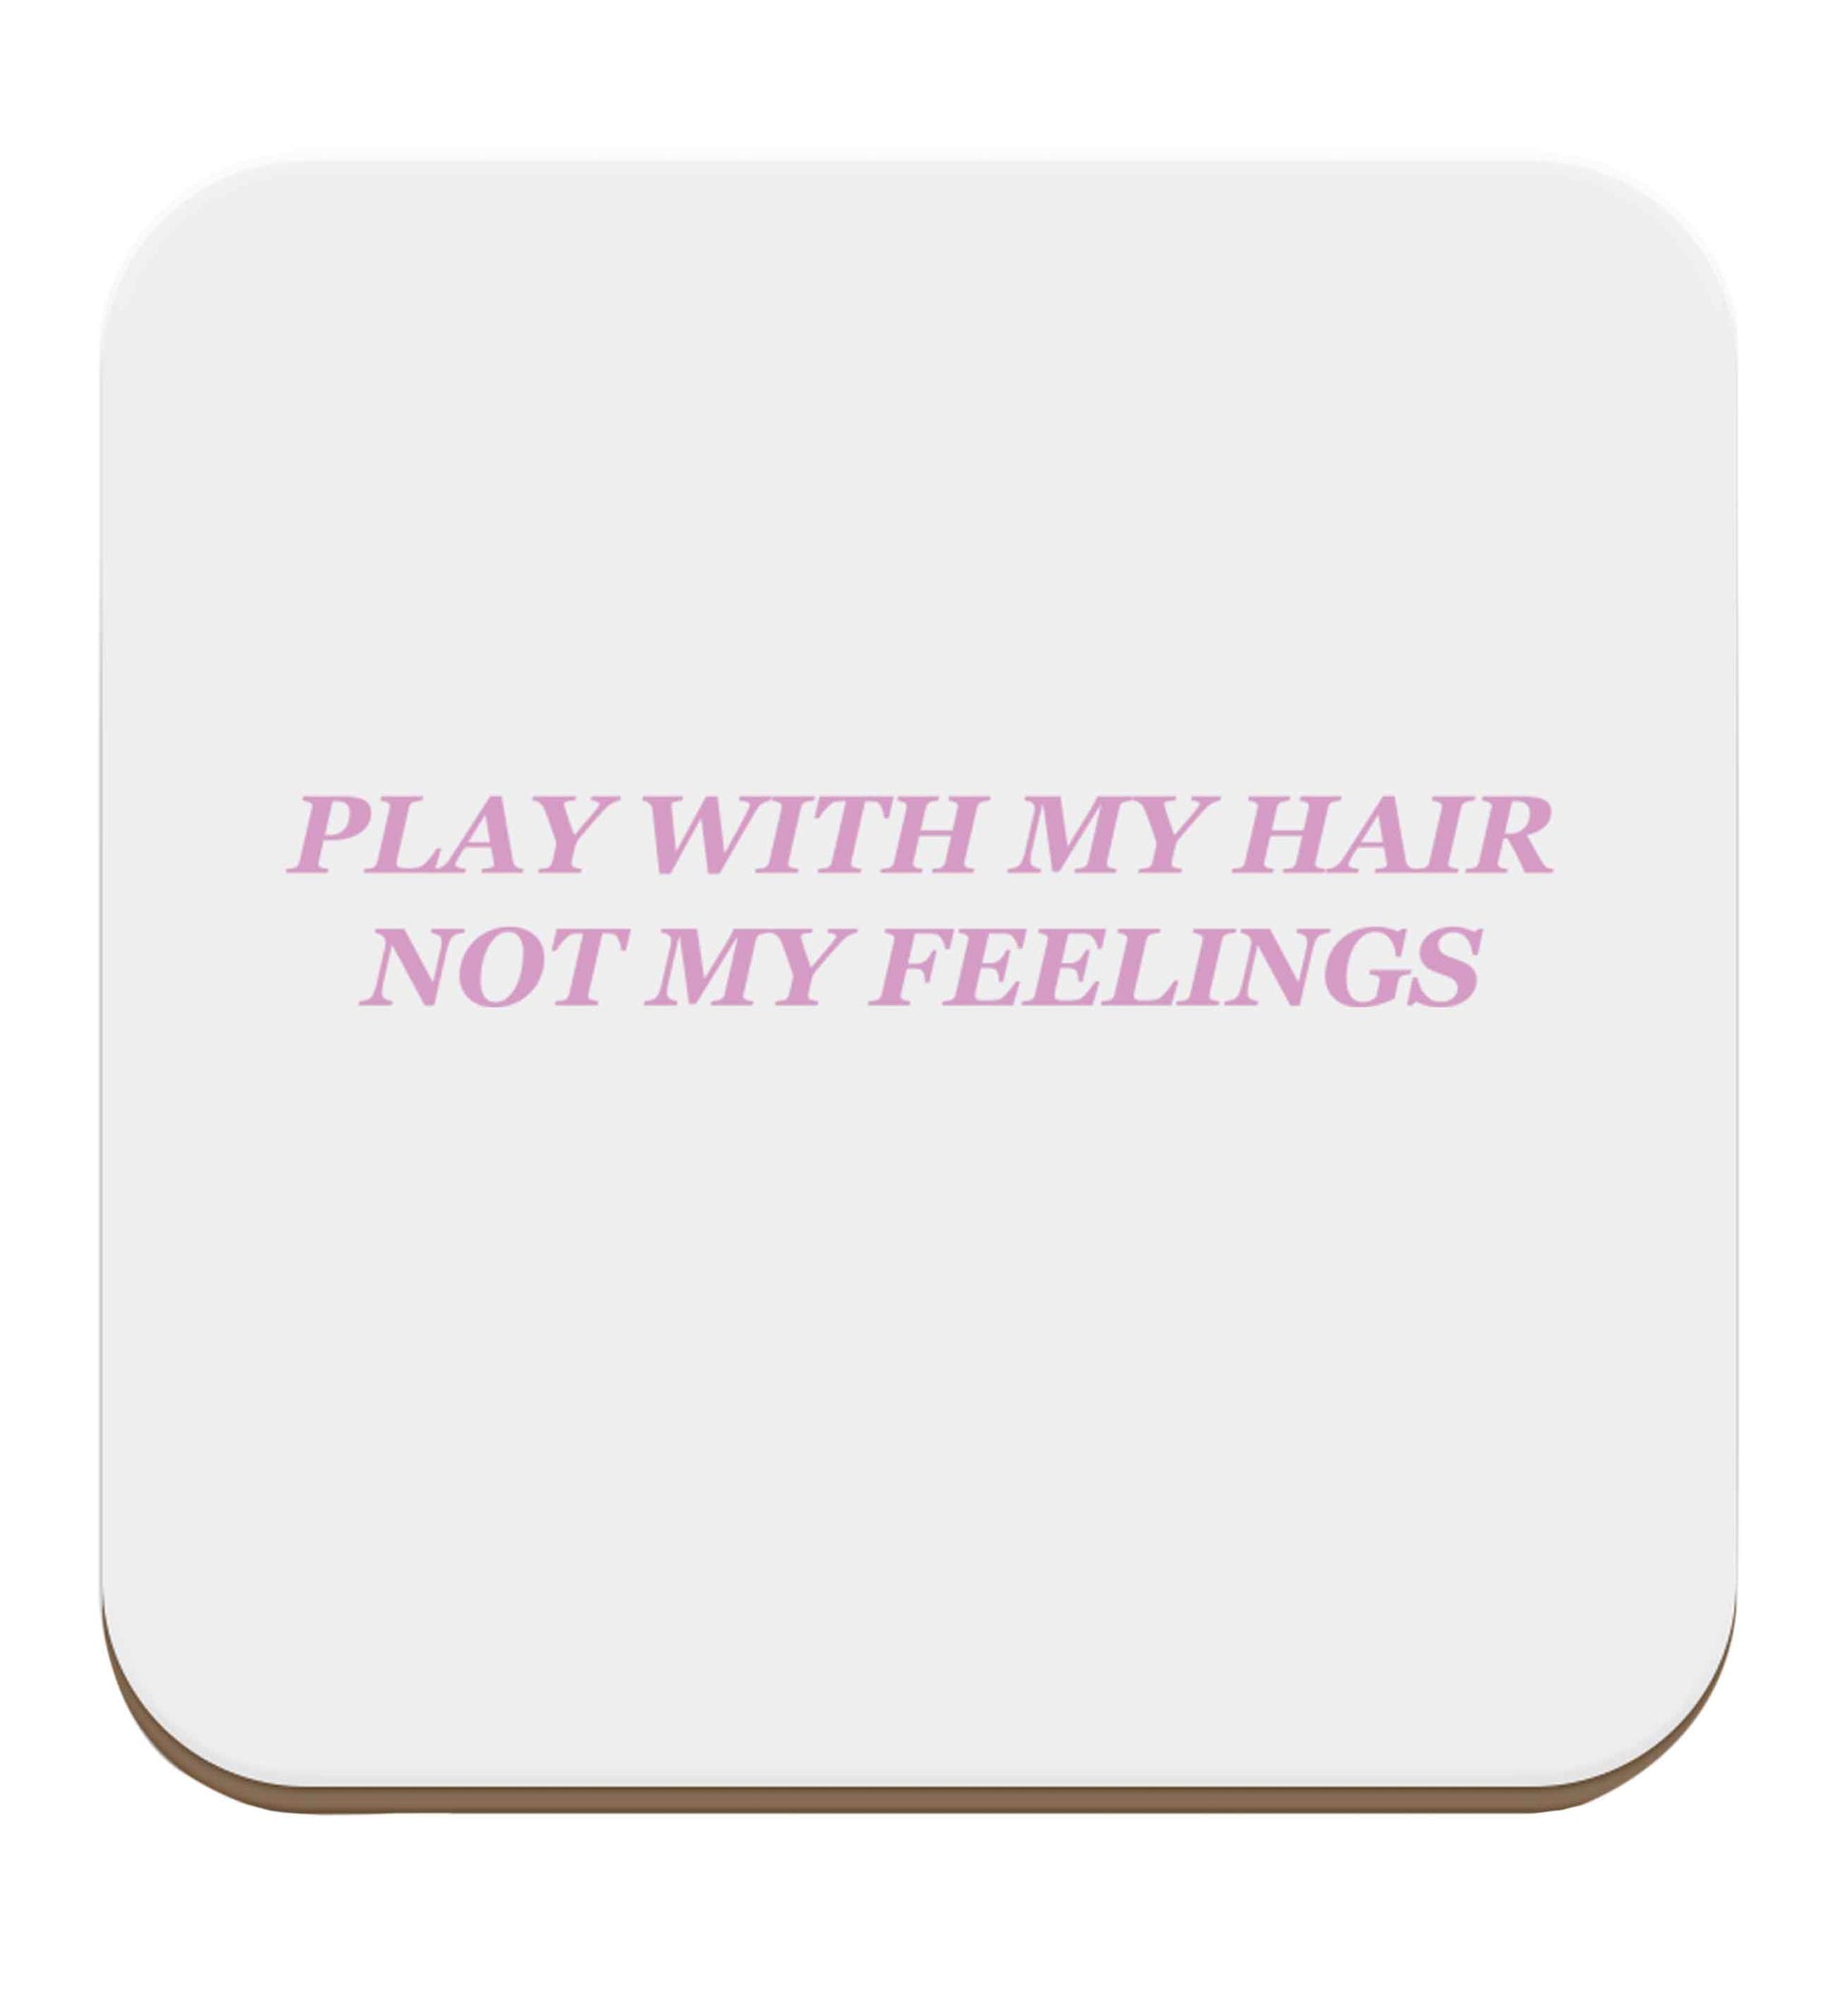 Play with my hair not my feelings set of four coasters